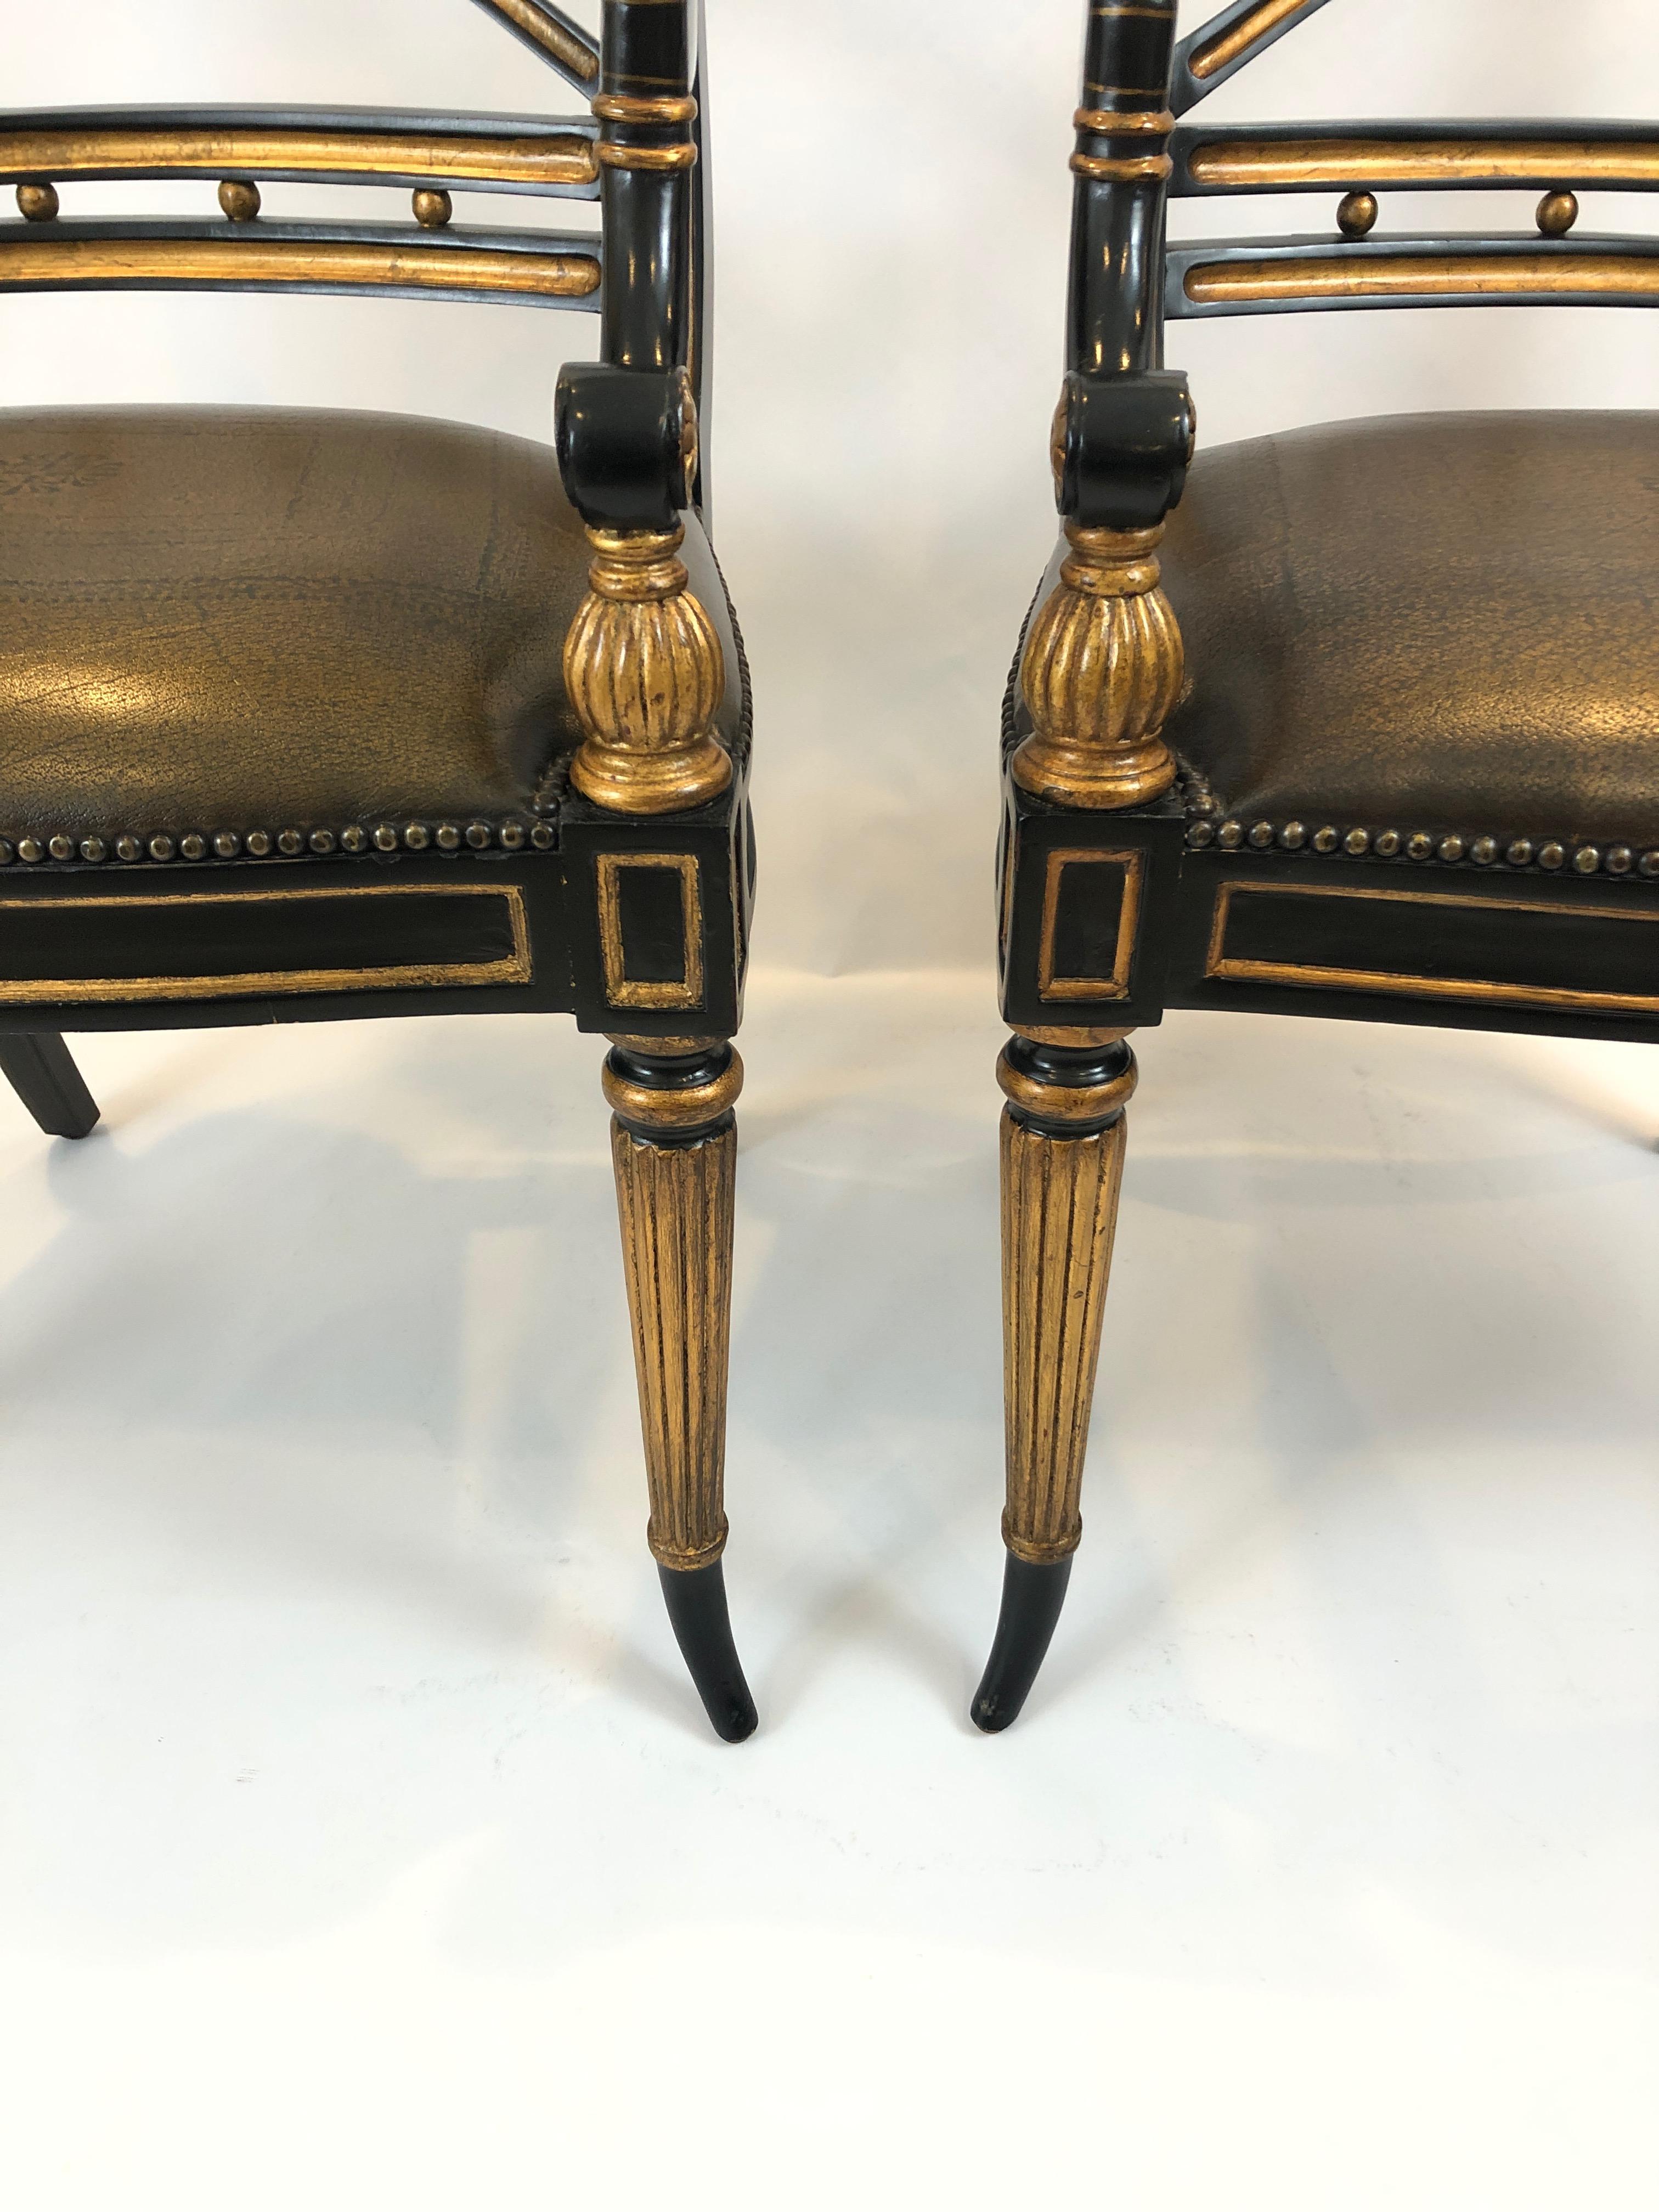 American Glamorous Pair of Regency Theodore Alexander Armchairs with Leather Seats